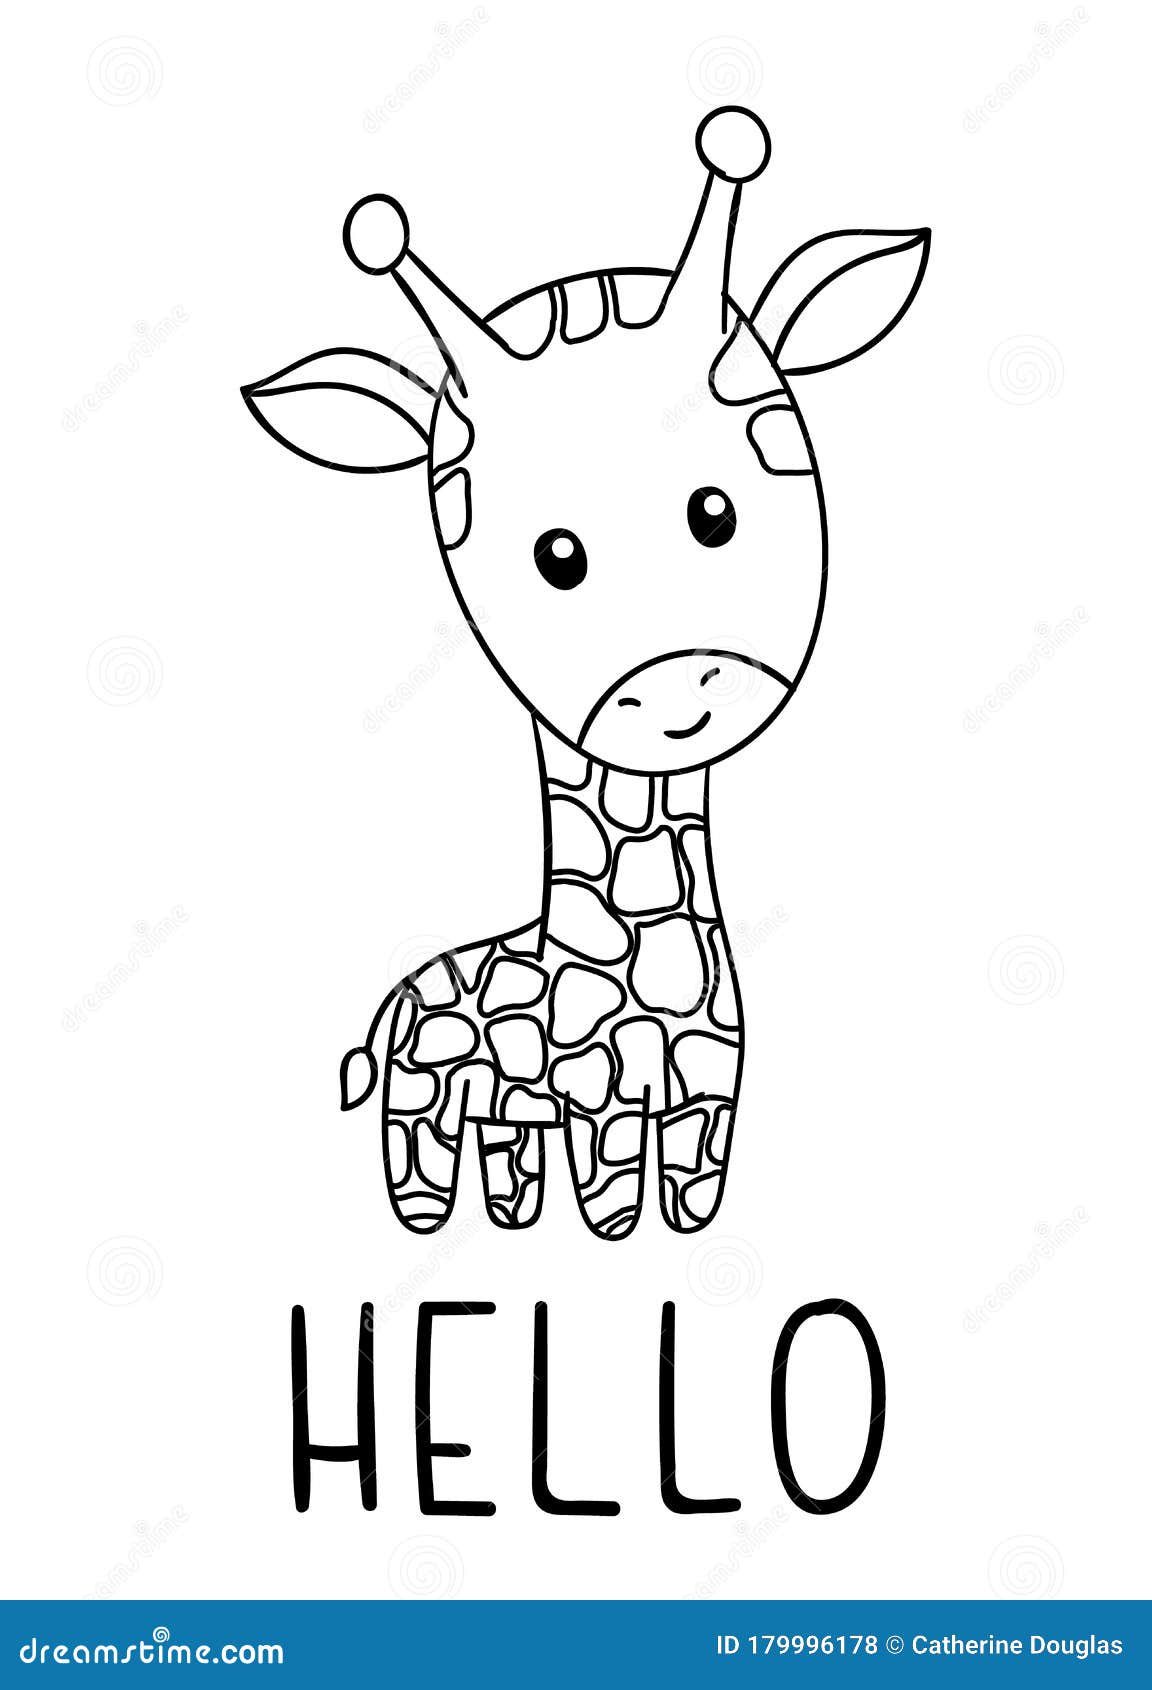 Coloring Pages, Black and White Cute Kawaii Hand Drawn Giraffe Doodles ...